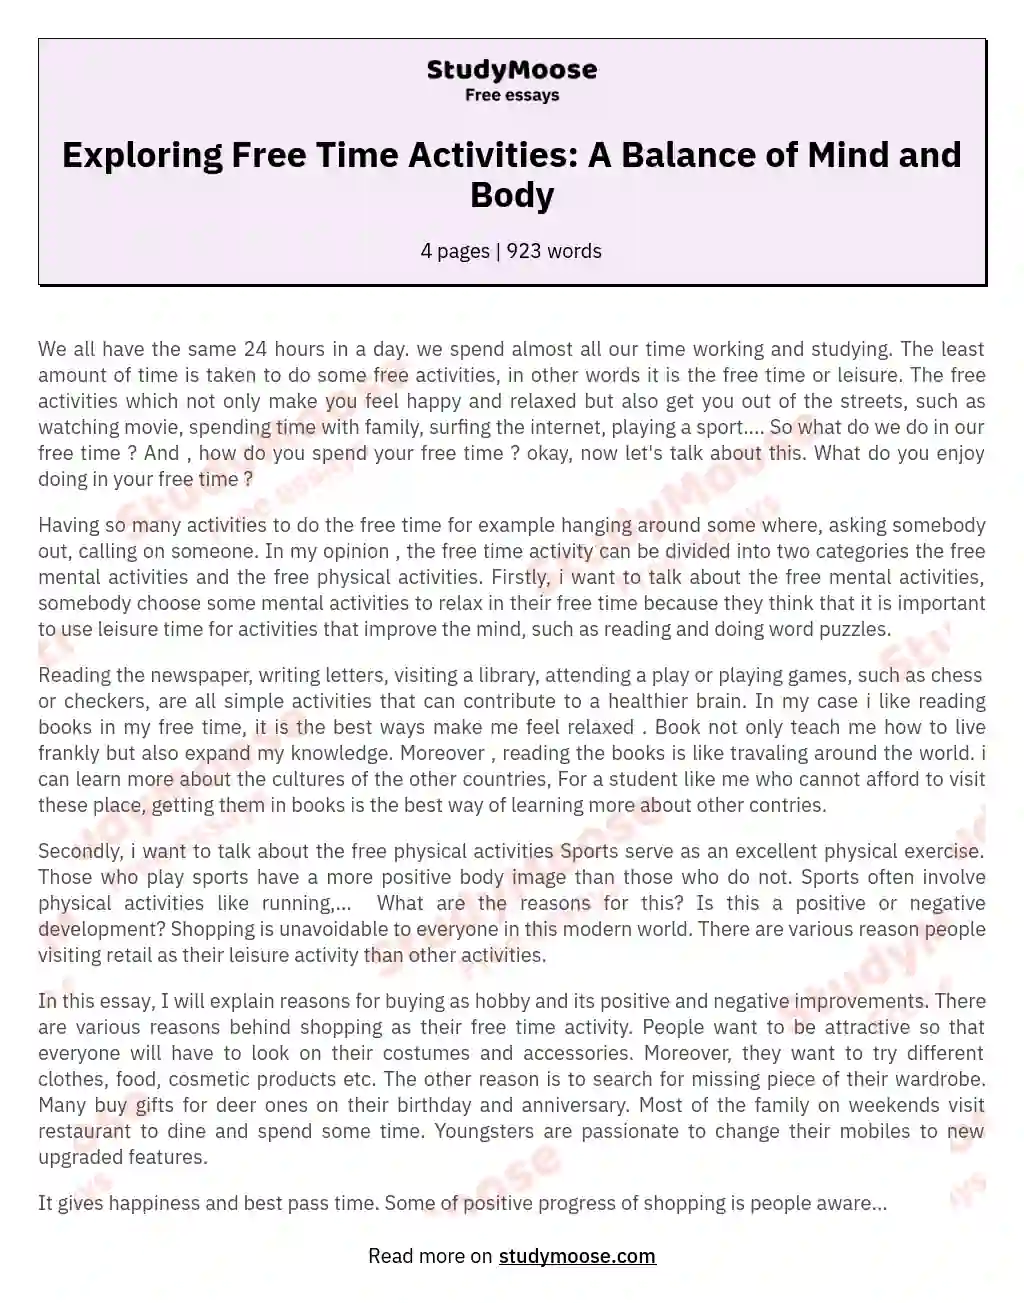 Exploring Free Time Activities: A Balance of Mind and Body essay